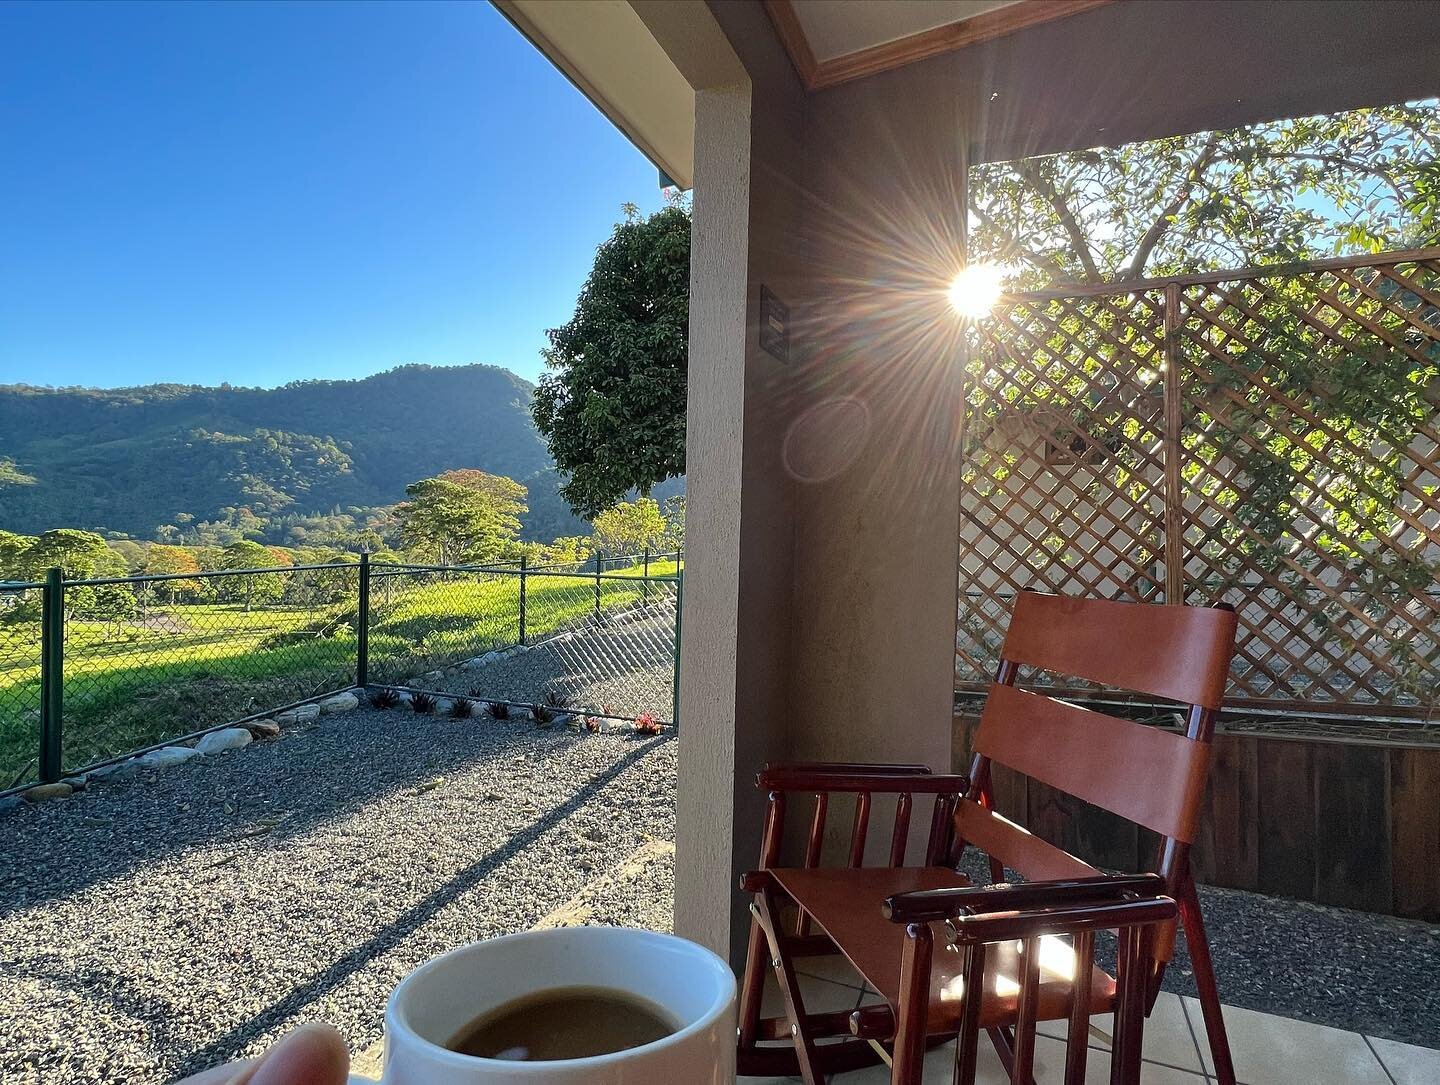 Good morning y&rsquo;all! I&rsquo;m just here sipping on my morning brew, living my best life. I love discovering new places to bring the travel crew. Where are you enjoying the breaking of the fast this morning? #valledeorosi #haciendaorosi #costari